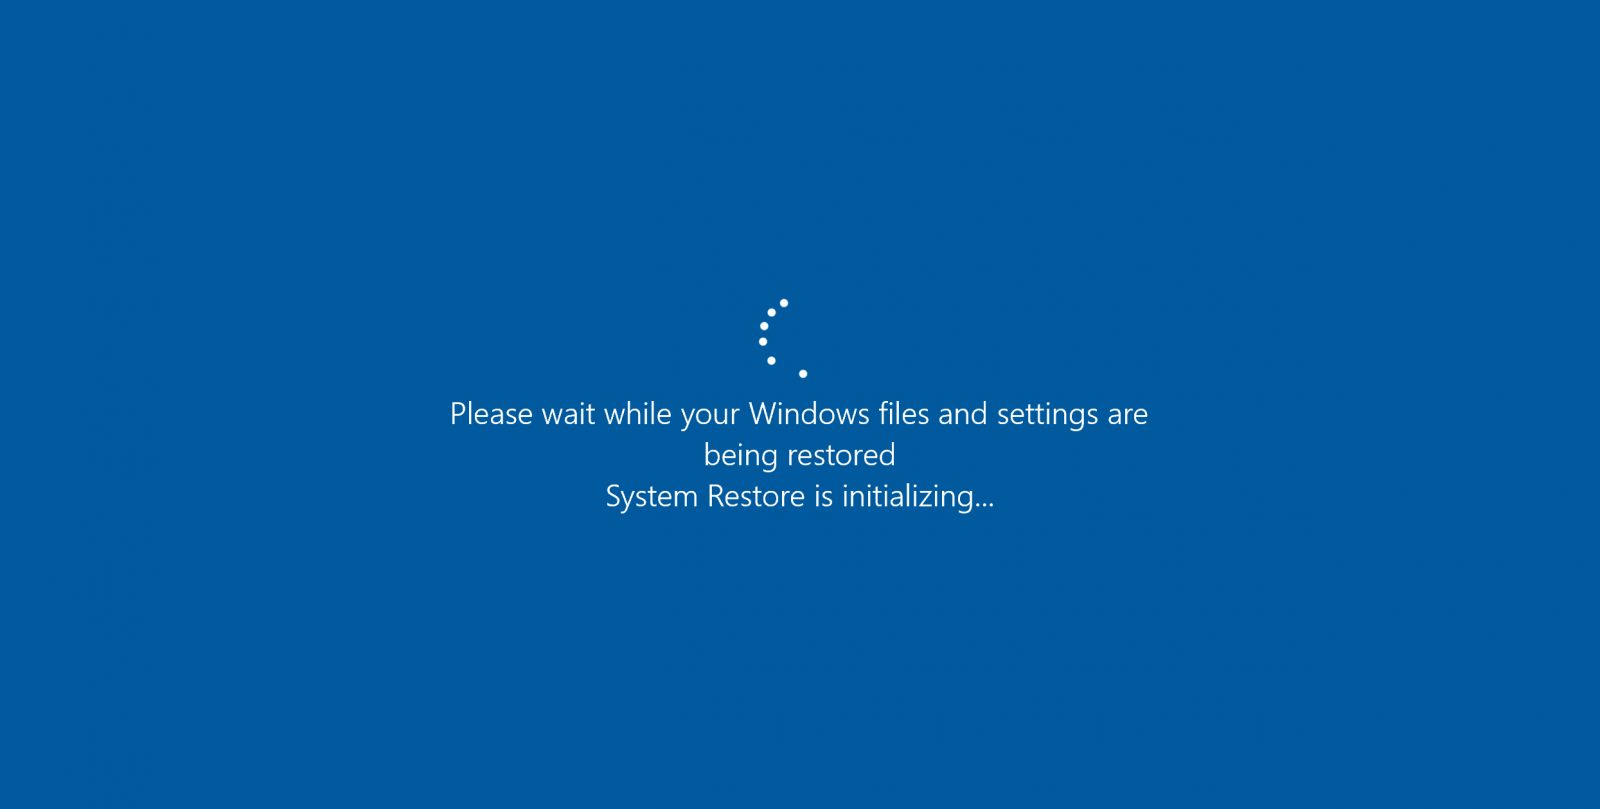 How to Recover Files After System Restore on Windows 10 & Other Versions